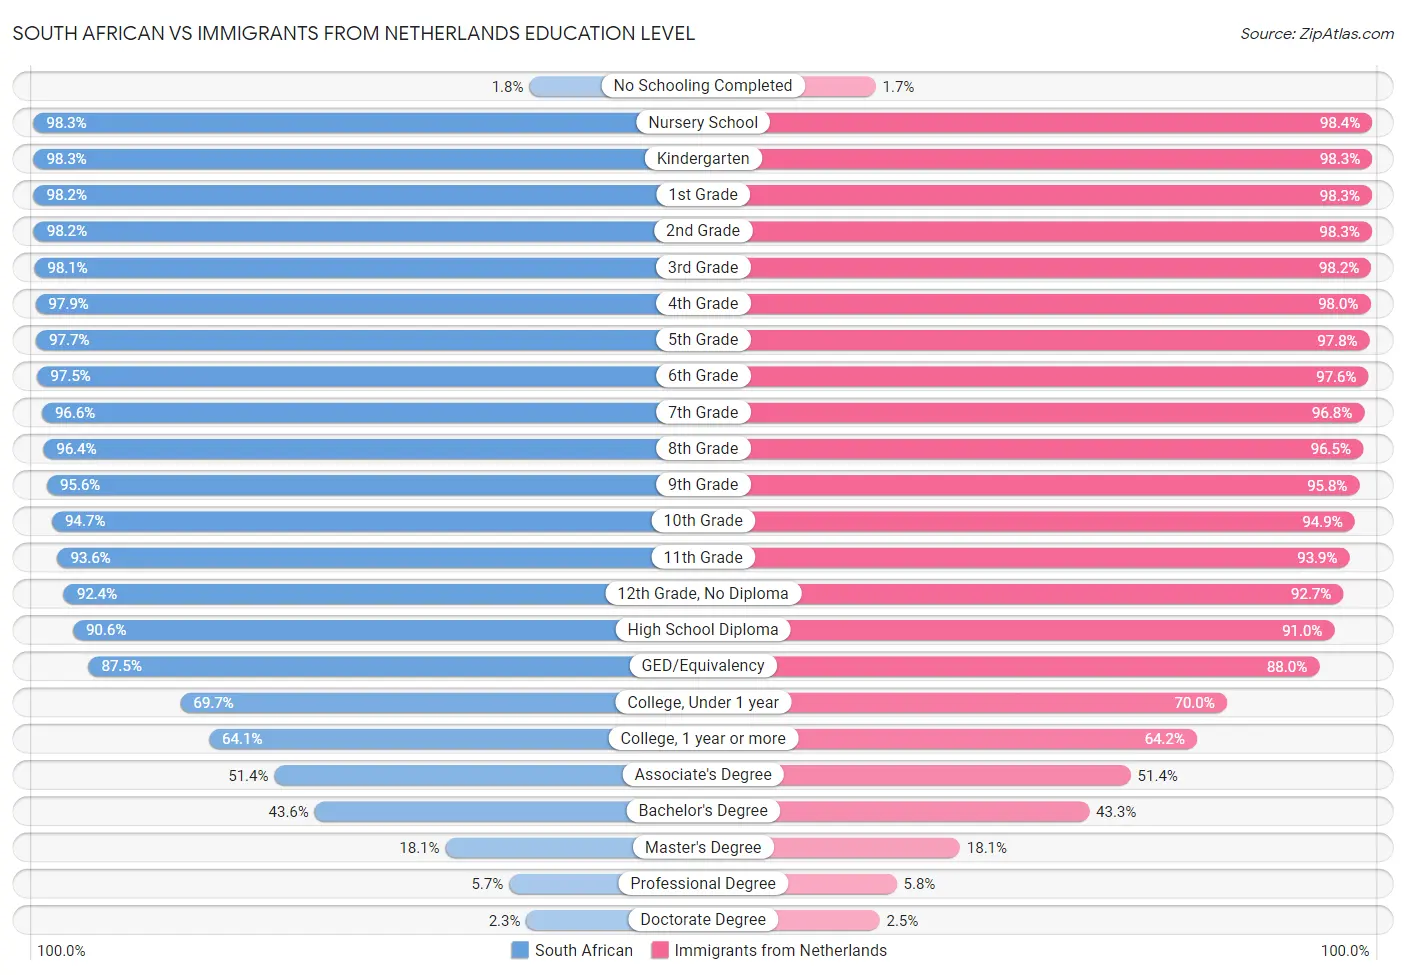 South African vs Immigrants from Netherlands Education Level